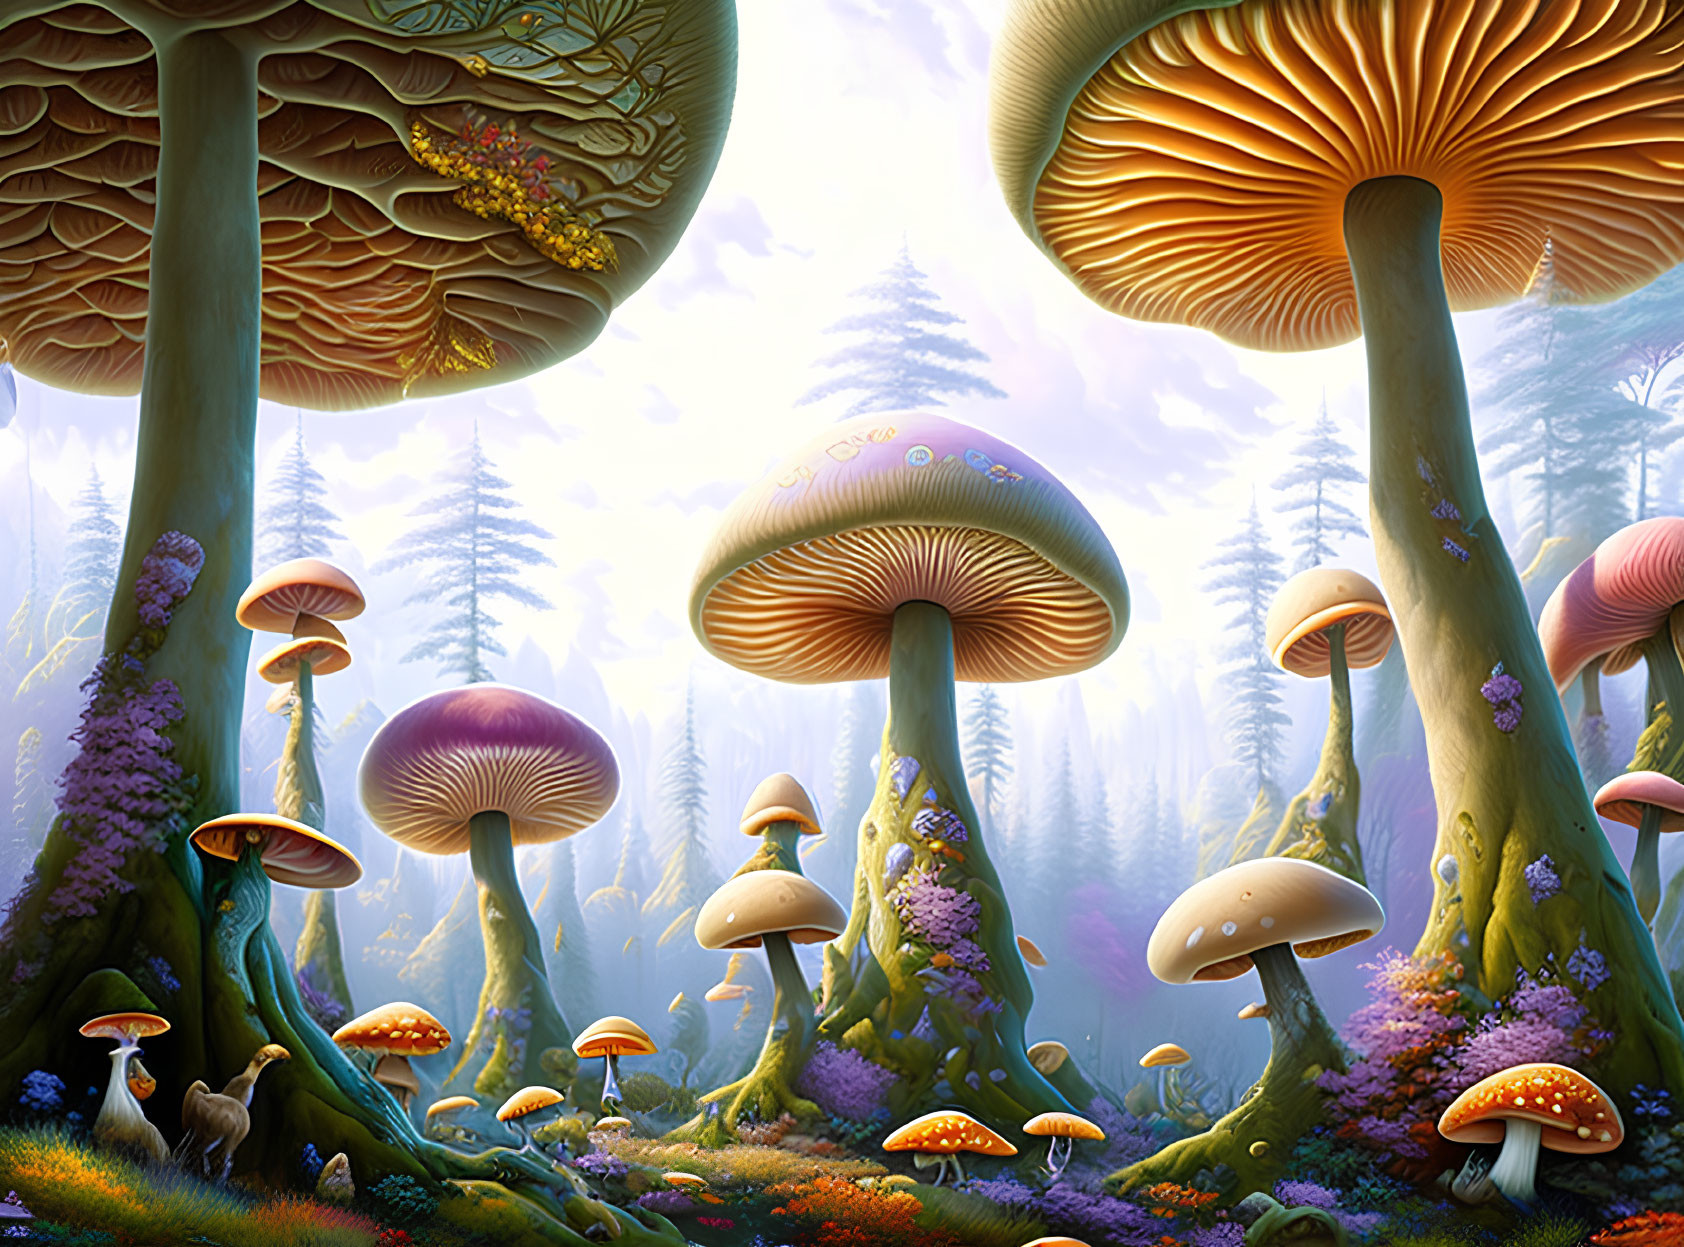 Colorful Fantasy Forest with Oversized Mushrooms & Glowing Sky